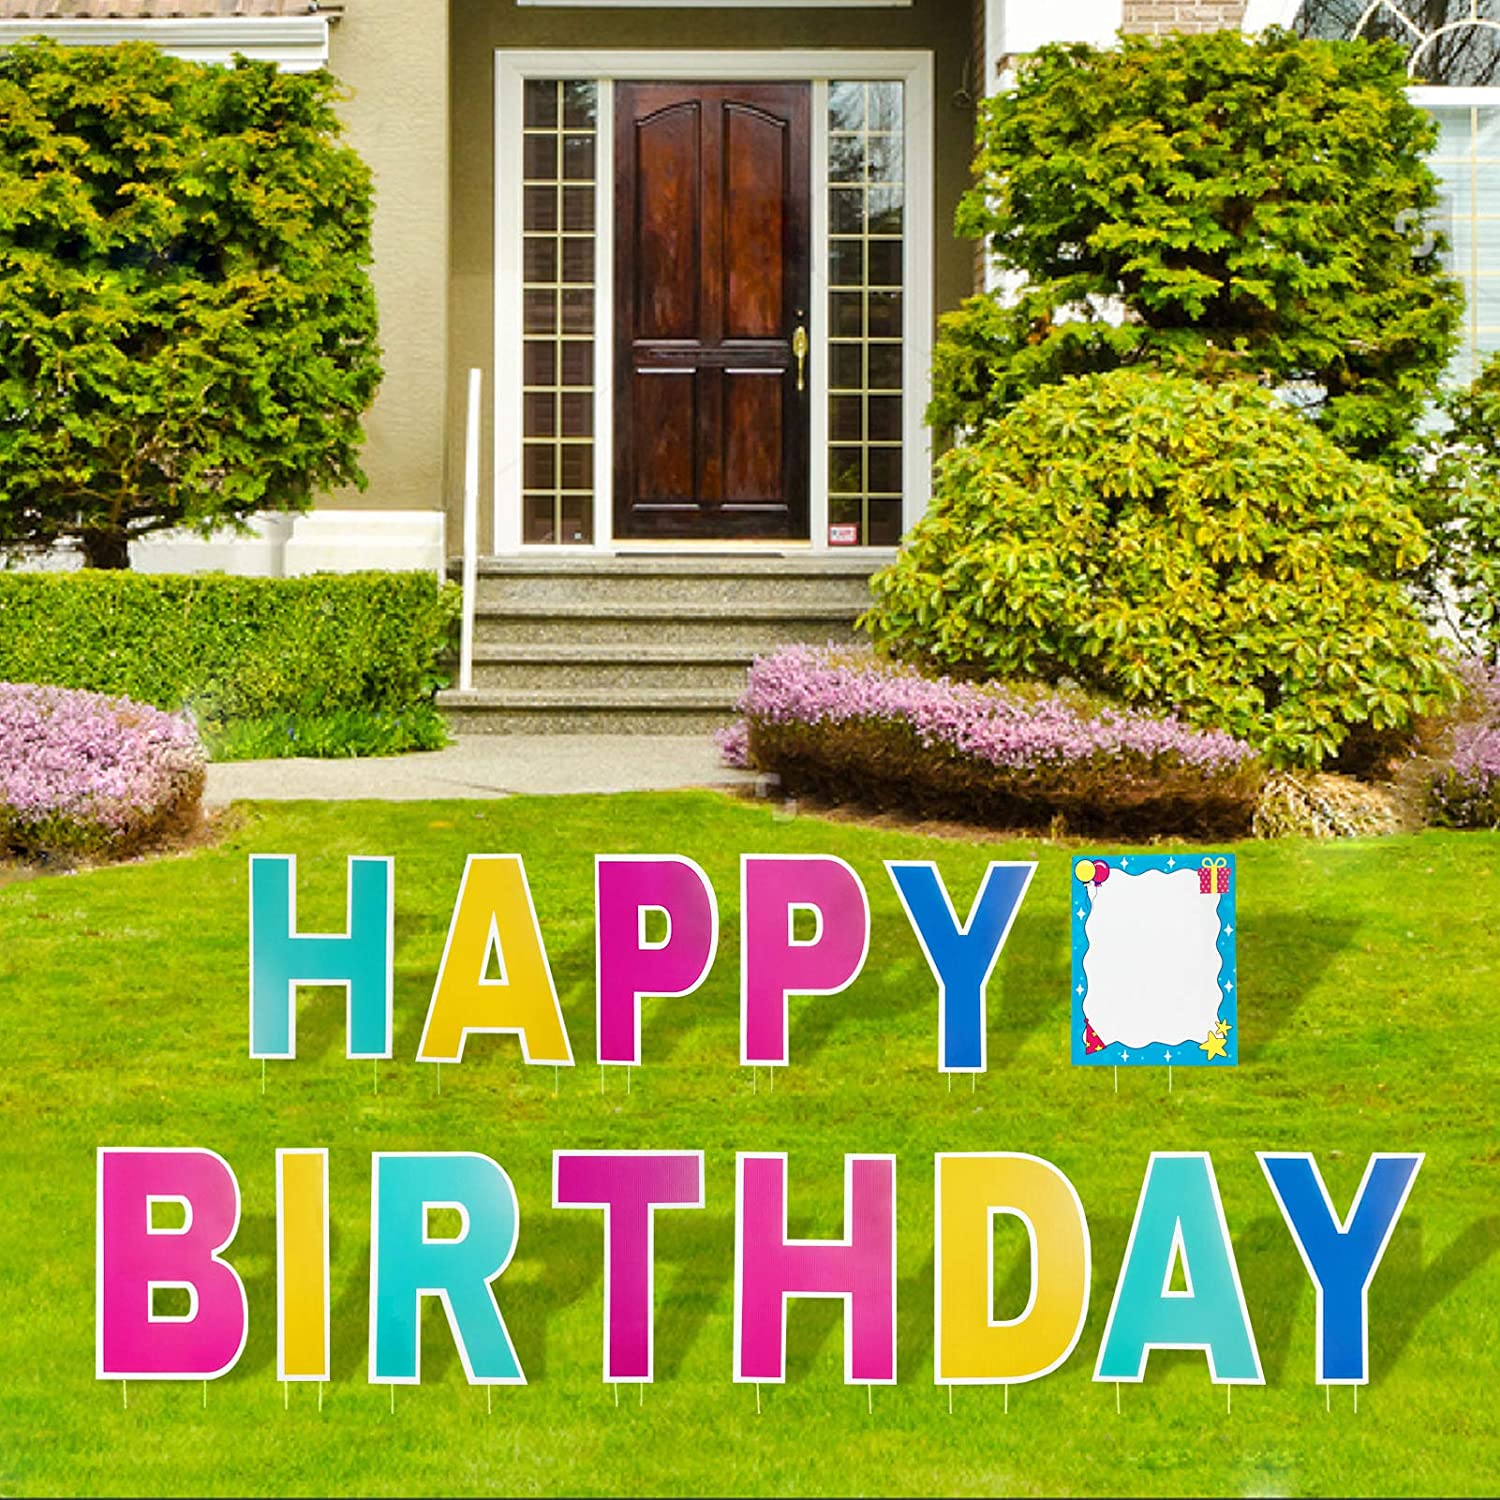 Low price for Happy 1st Birthday Yard Letters - Happy Birthday Yard Sign 16 Inch Birthday Letters Lawn Sign Colorful Birthday Yard Decoration with Stakes Cake Balloon Waterproof Garden Lawn Decor ...